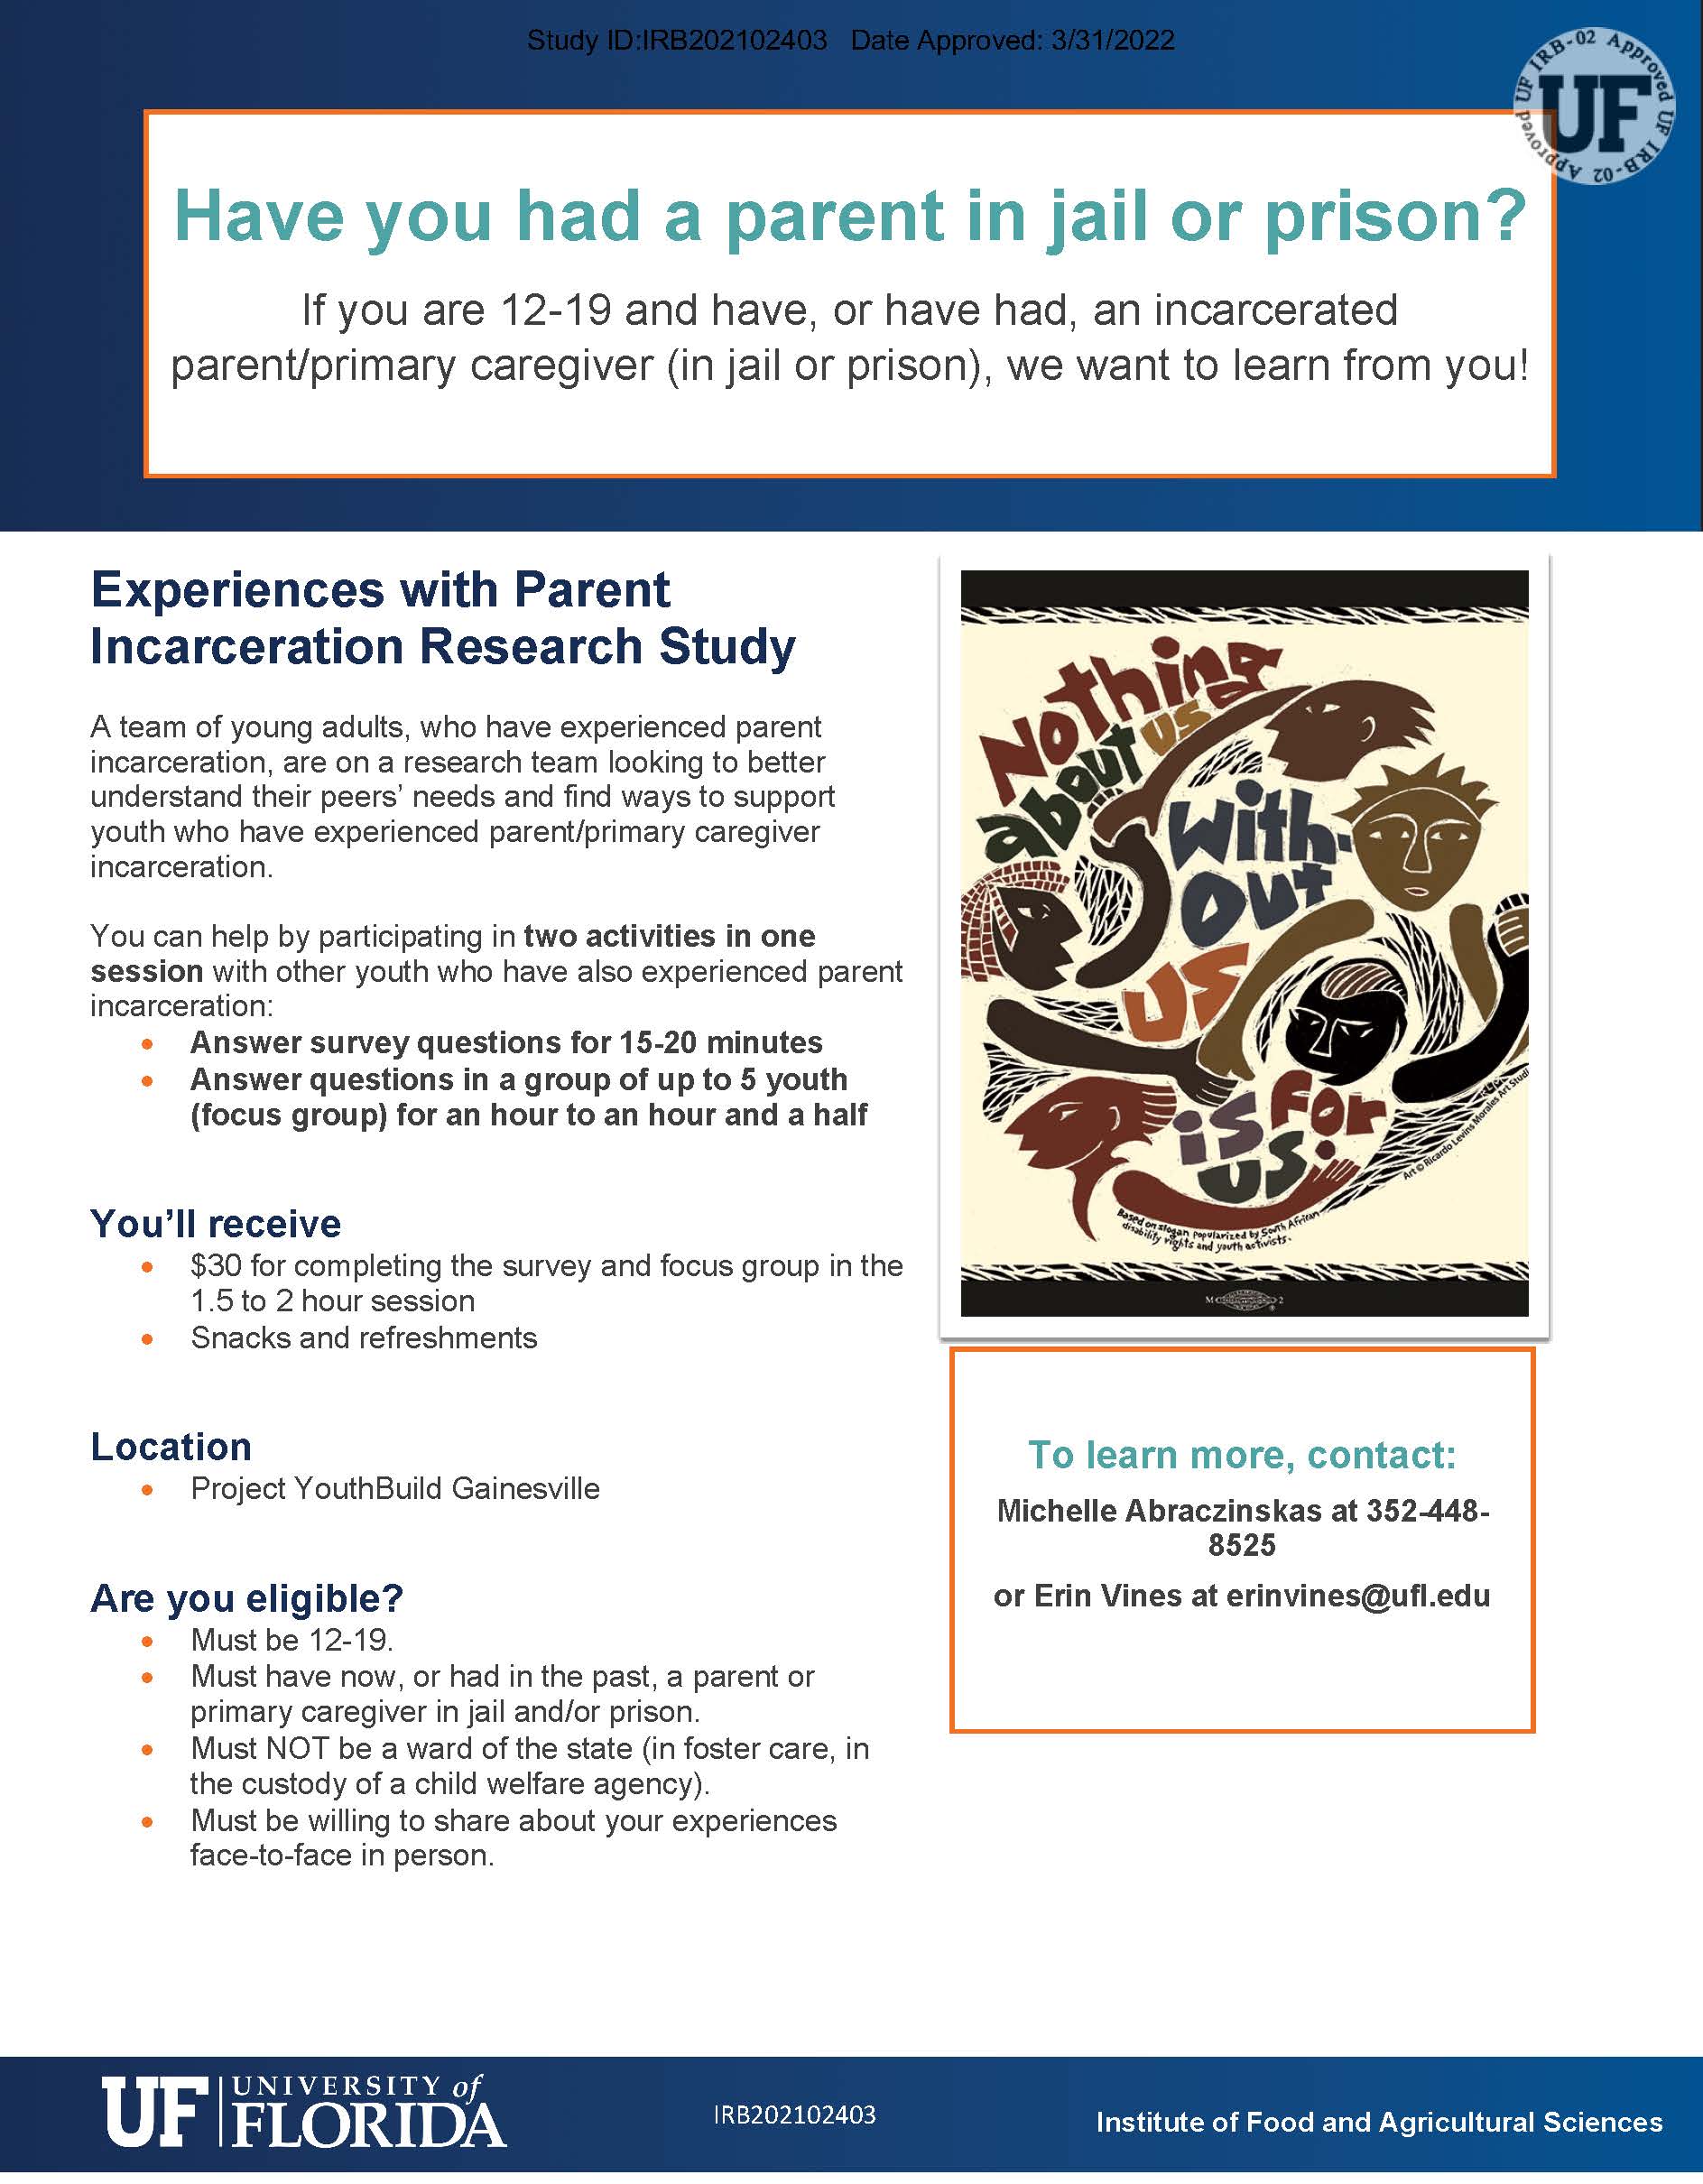 Experiences with Parent Incarceration Research Study